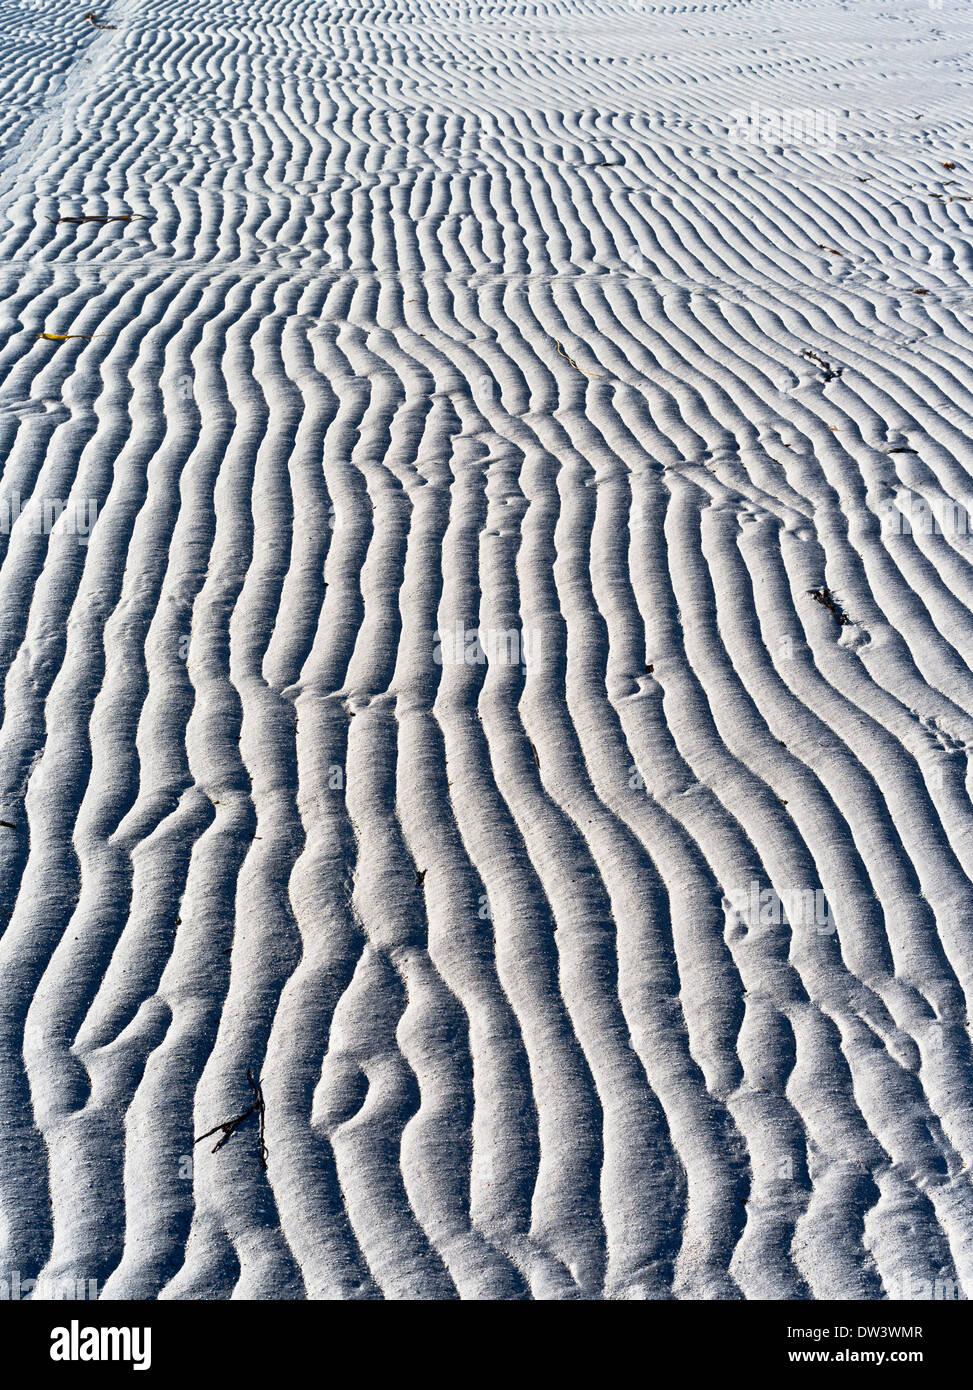 dh Beach sand patterns SANDAY ISLAND ORKNEY ISLES Abstract close up water pattern background from above Stock Photo